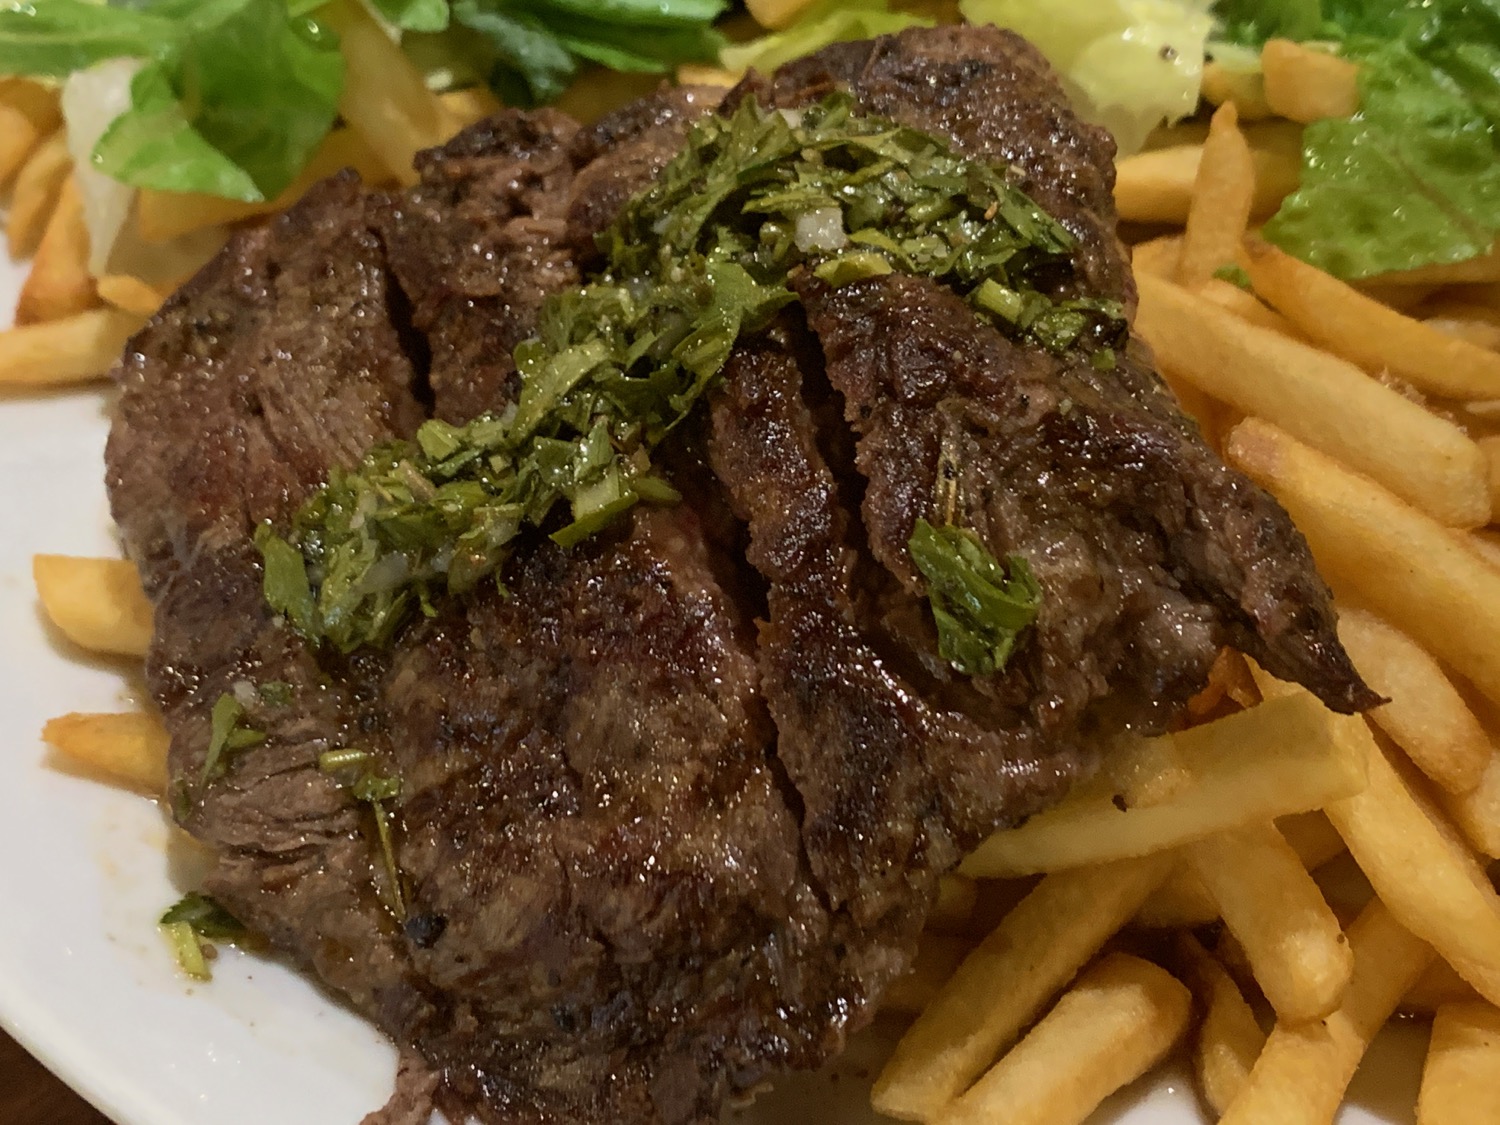 a plate of steak and fries